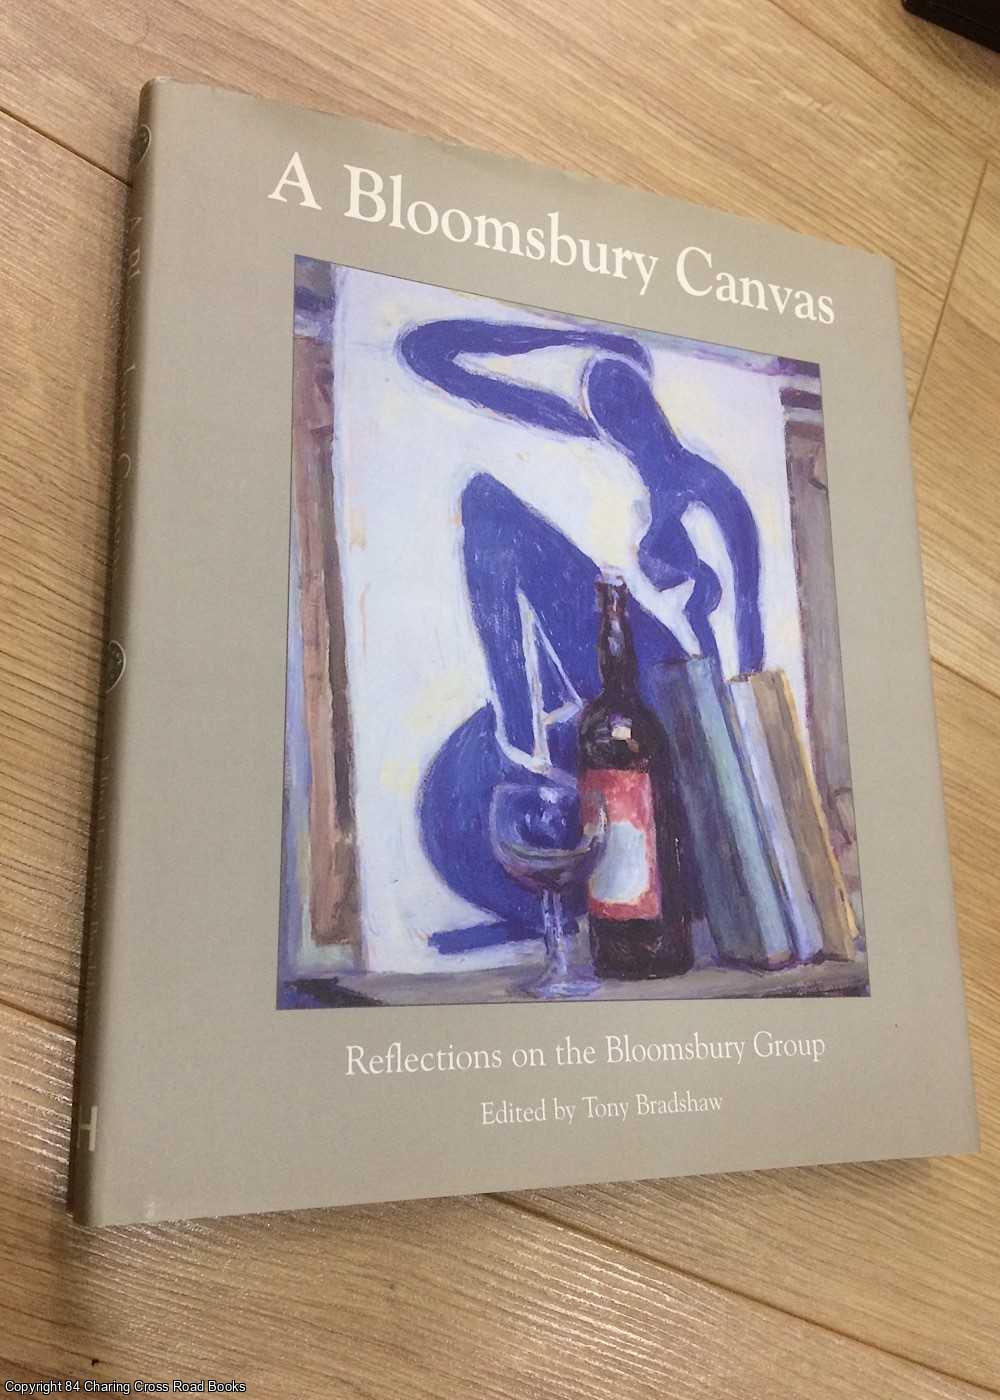 Bradshaw, Tony (Editor) - A Bloomsbury Canvas: Reflections on the Bloomsbury Group